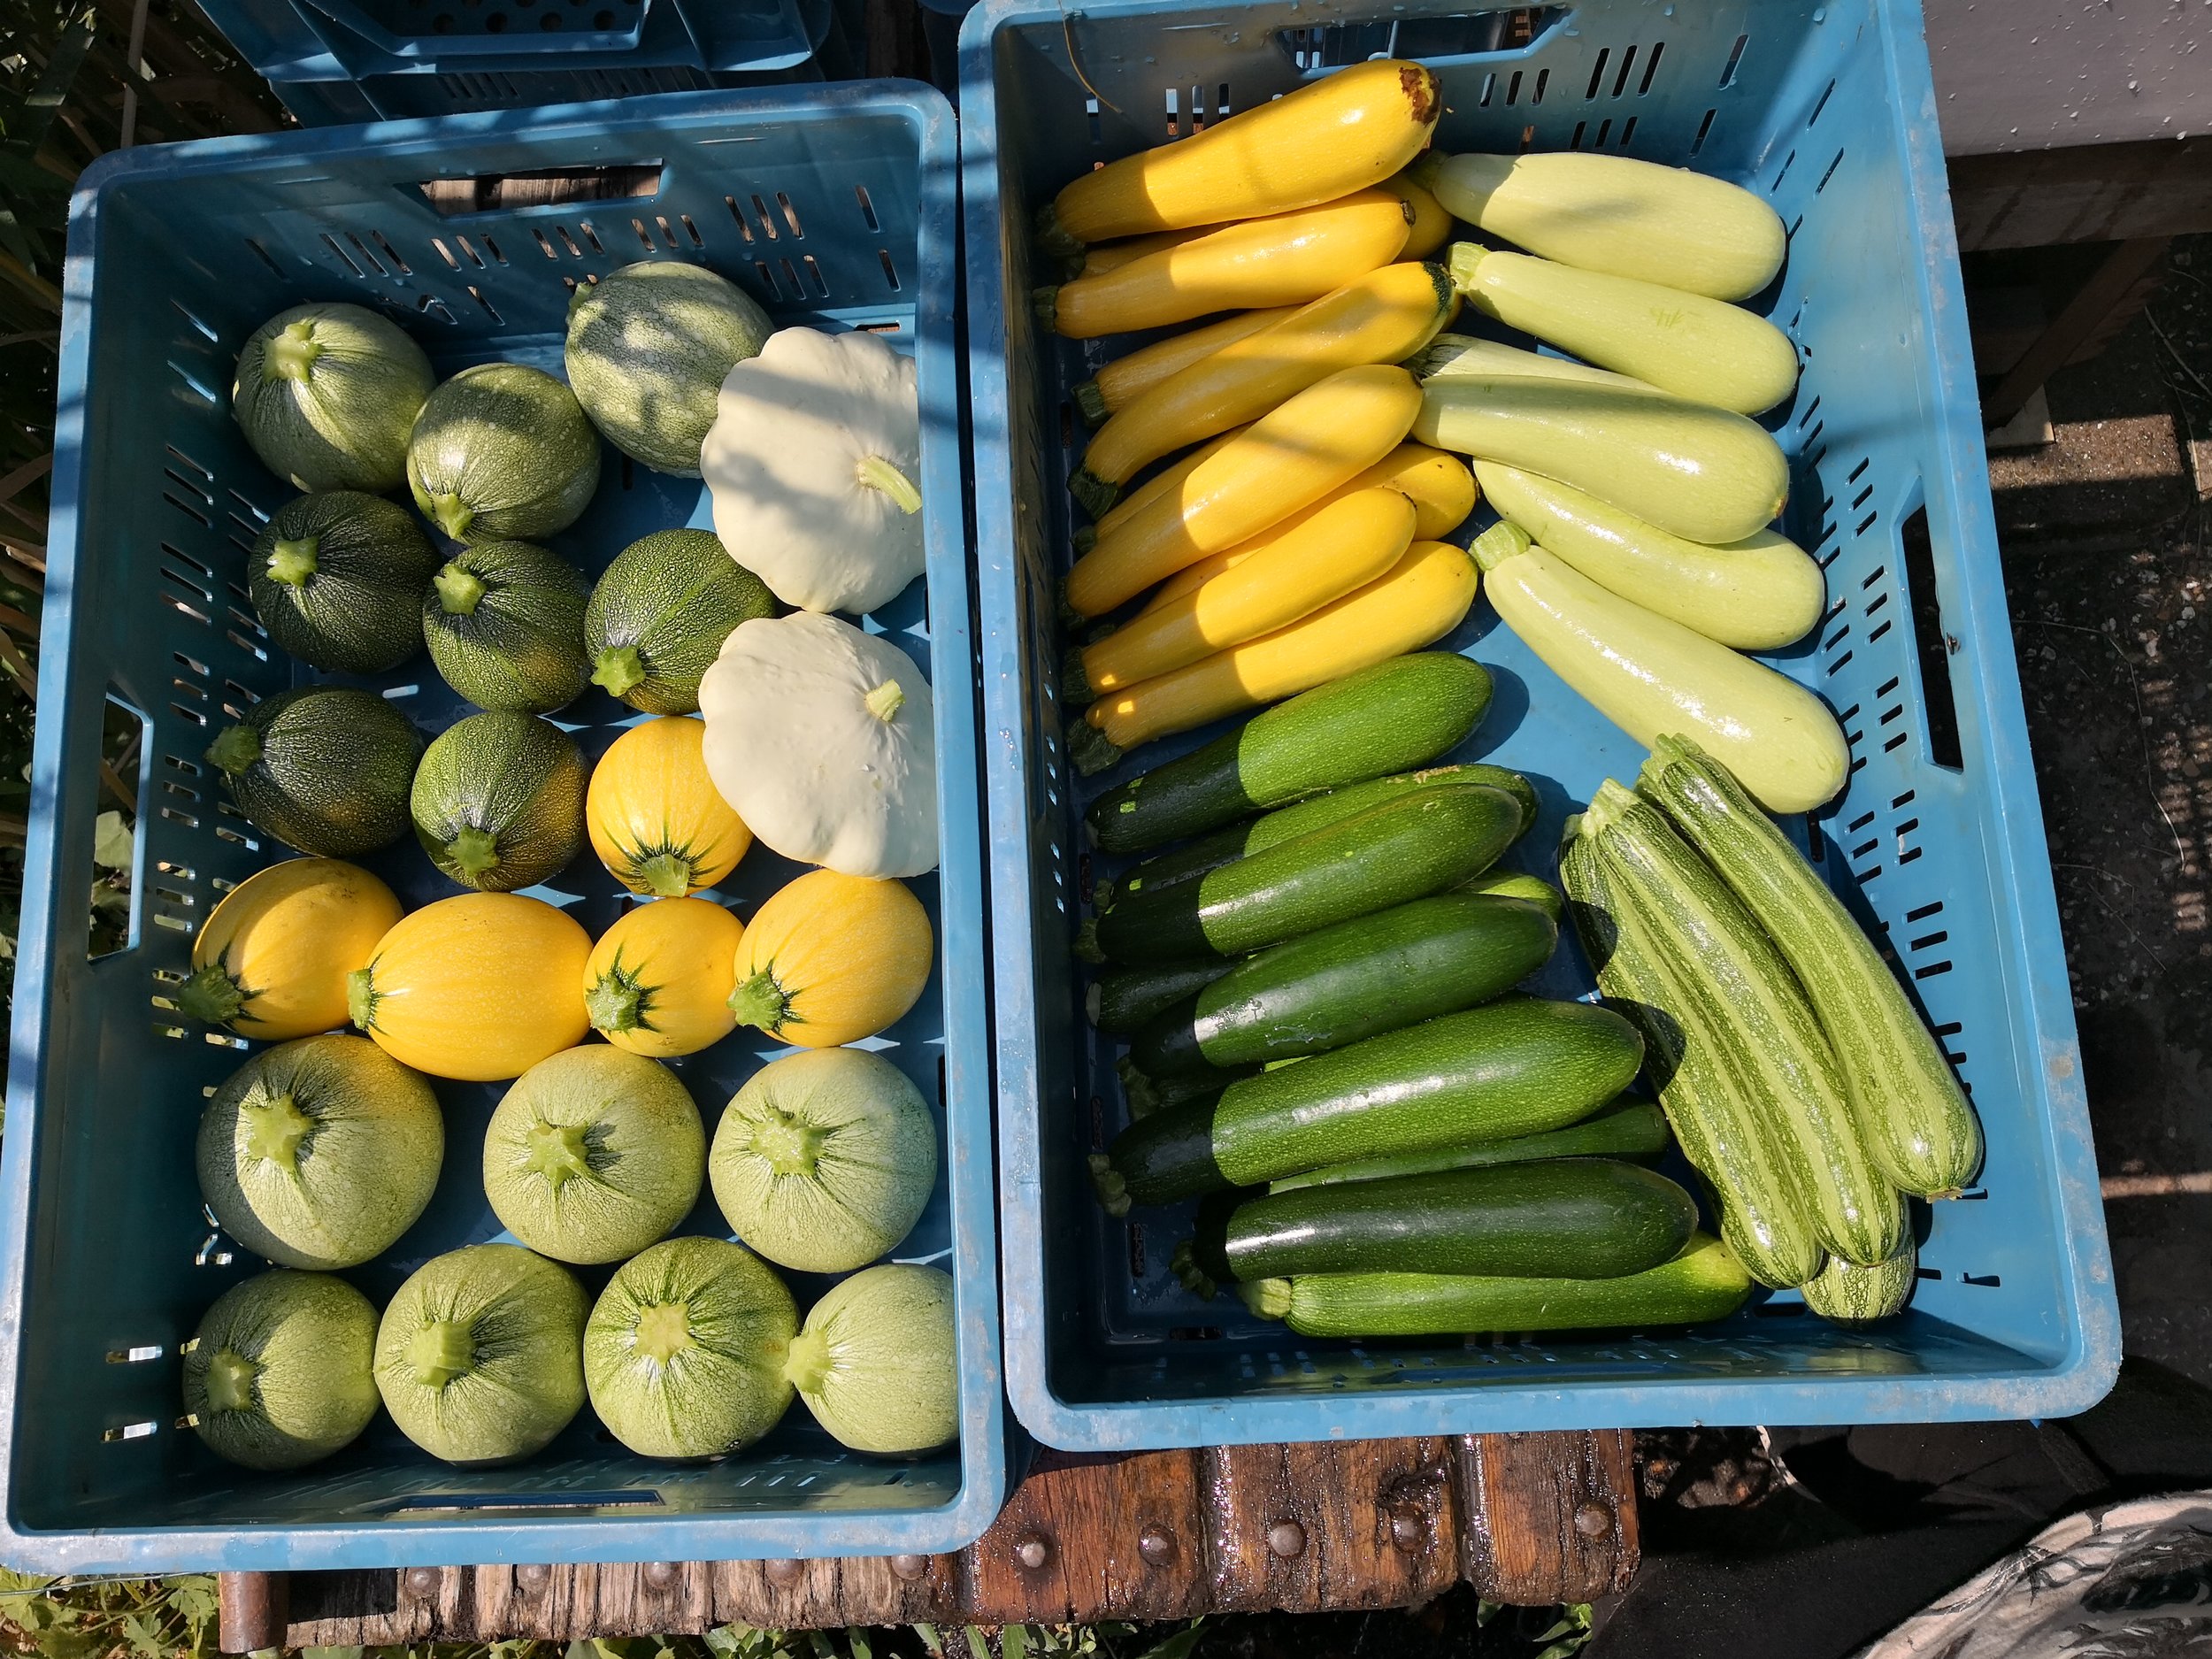 07-18 courgettes.jpg